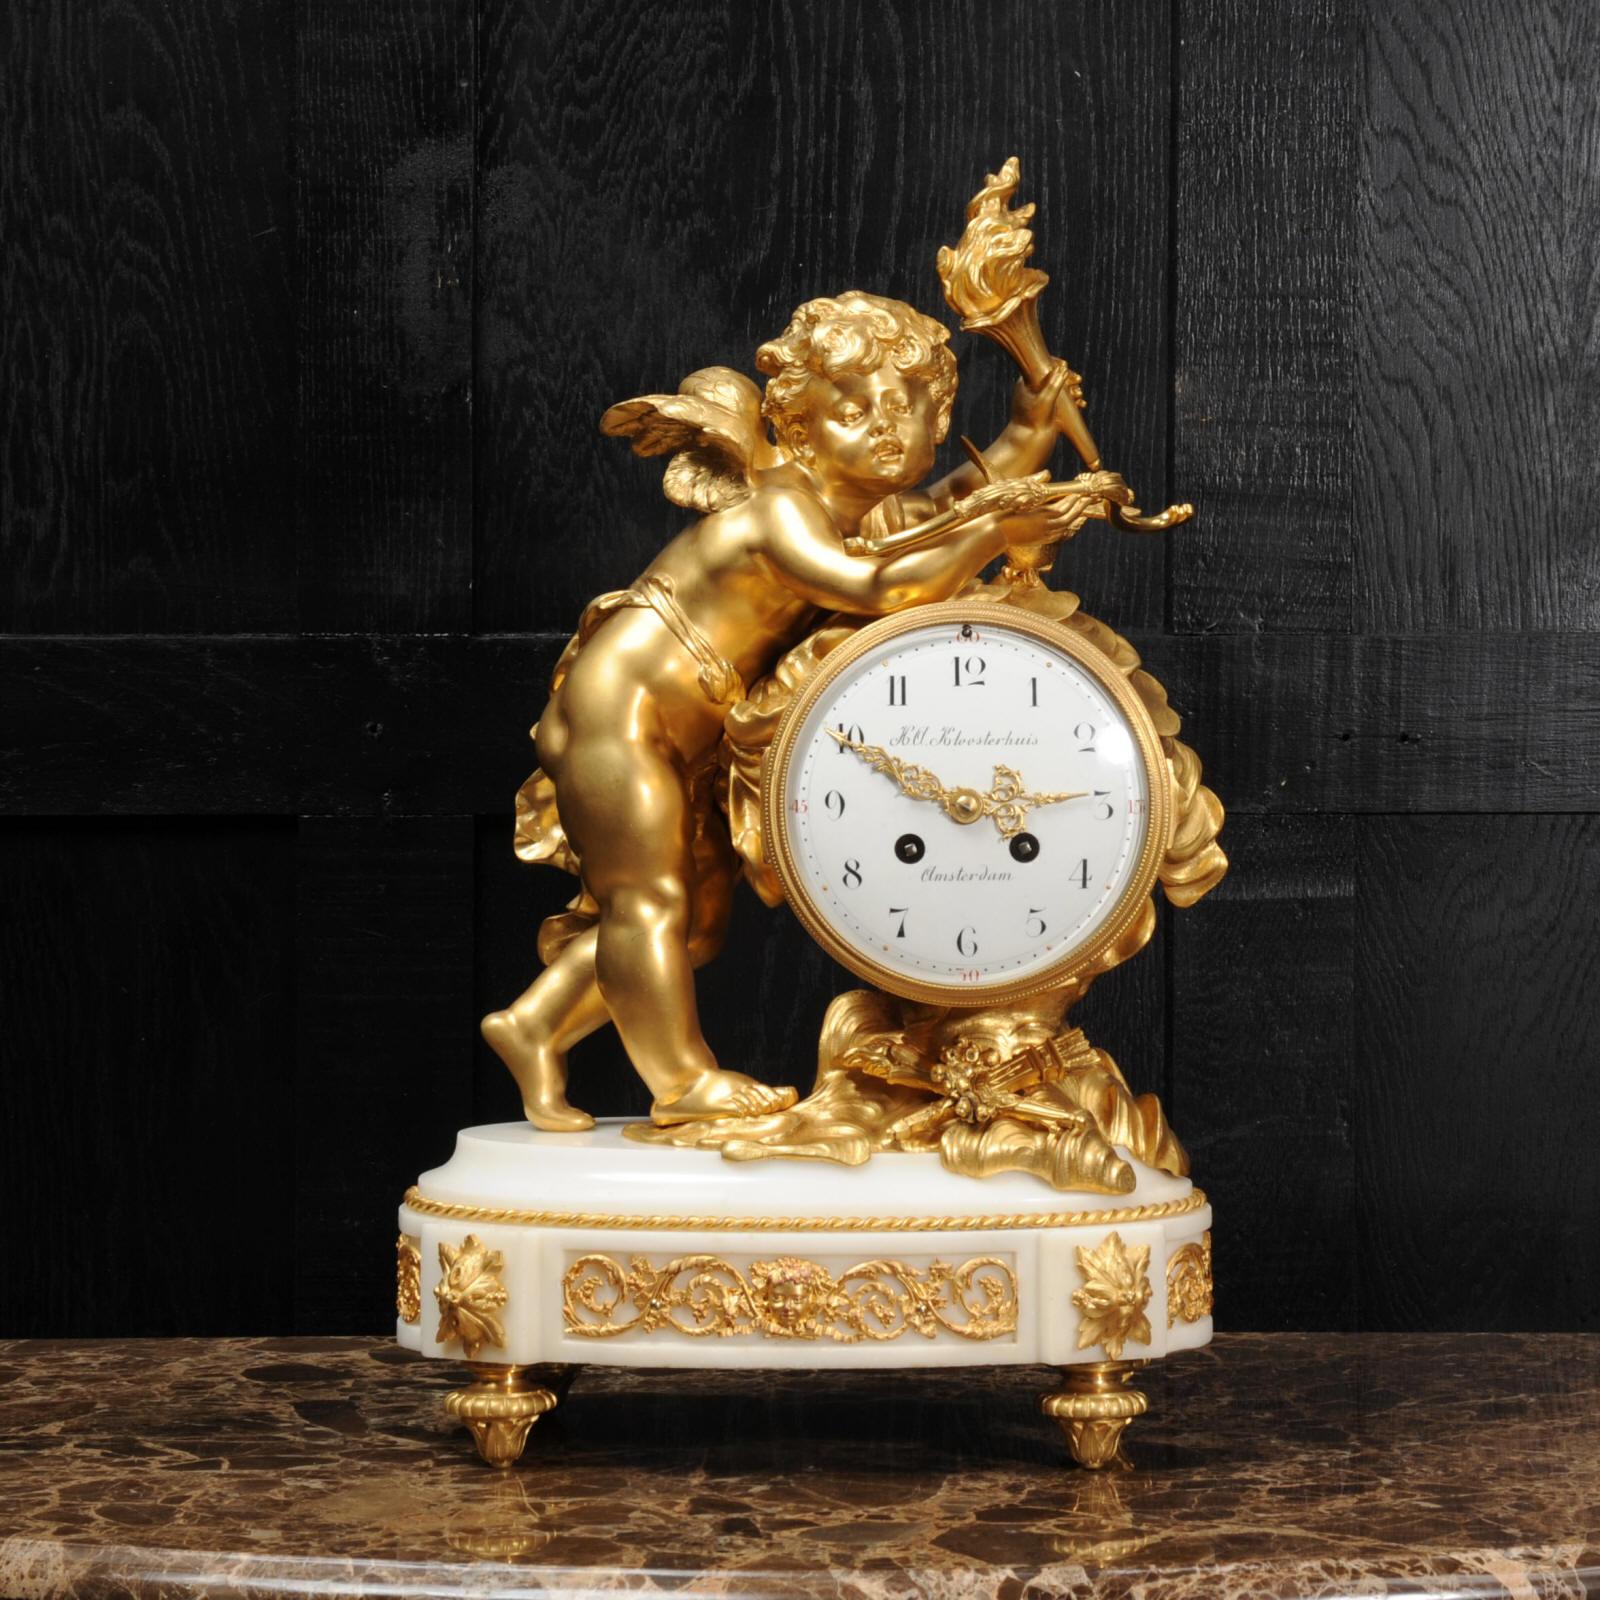 A large and stunning original antique French clock of the highest quality. It depicts Cupid among the clouds, carrying a flaming torch with which to enflame his victims with love and a bow from which he has fired an arrow. Between his arms is a